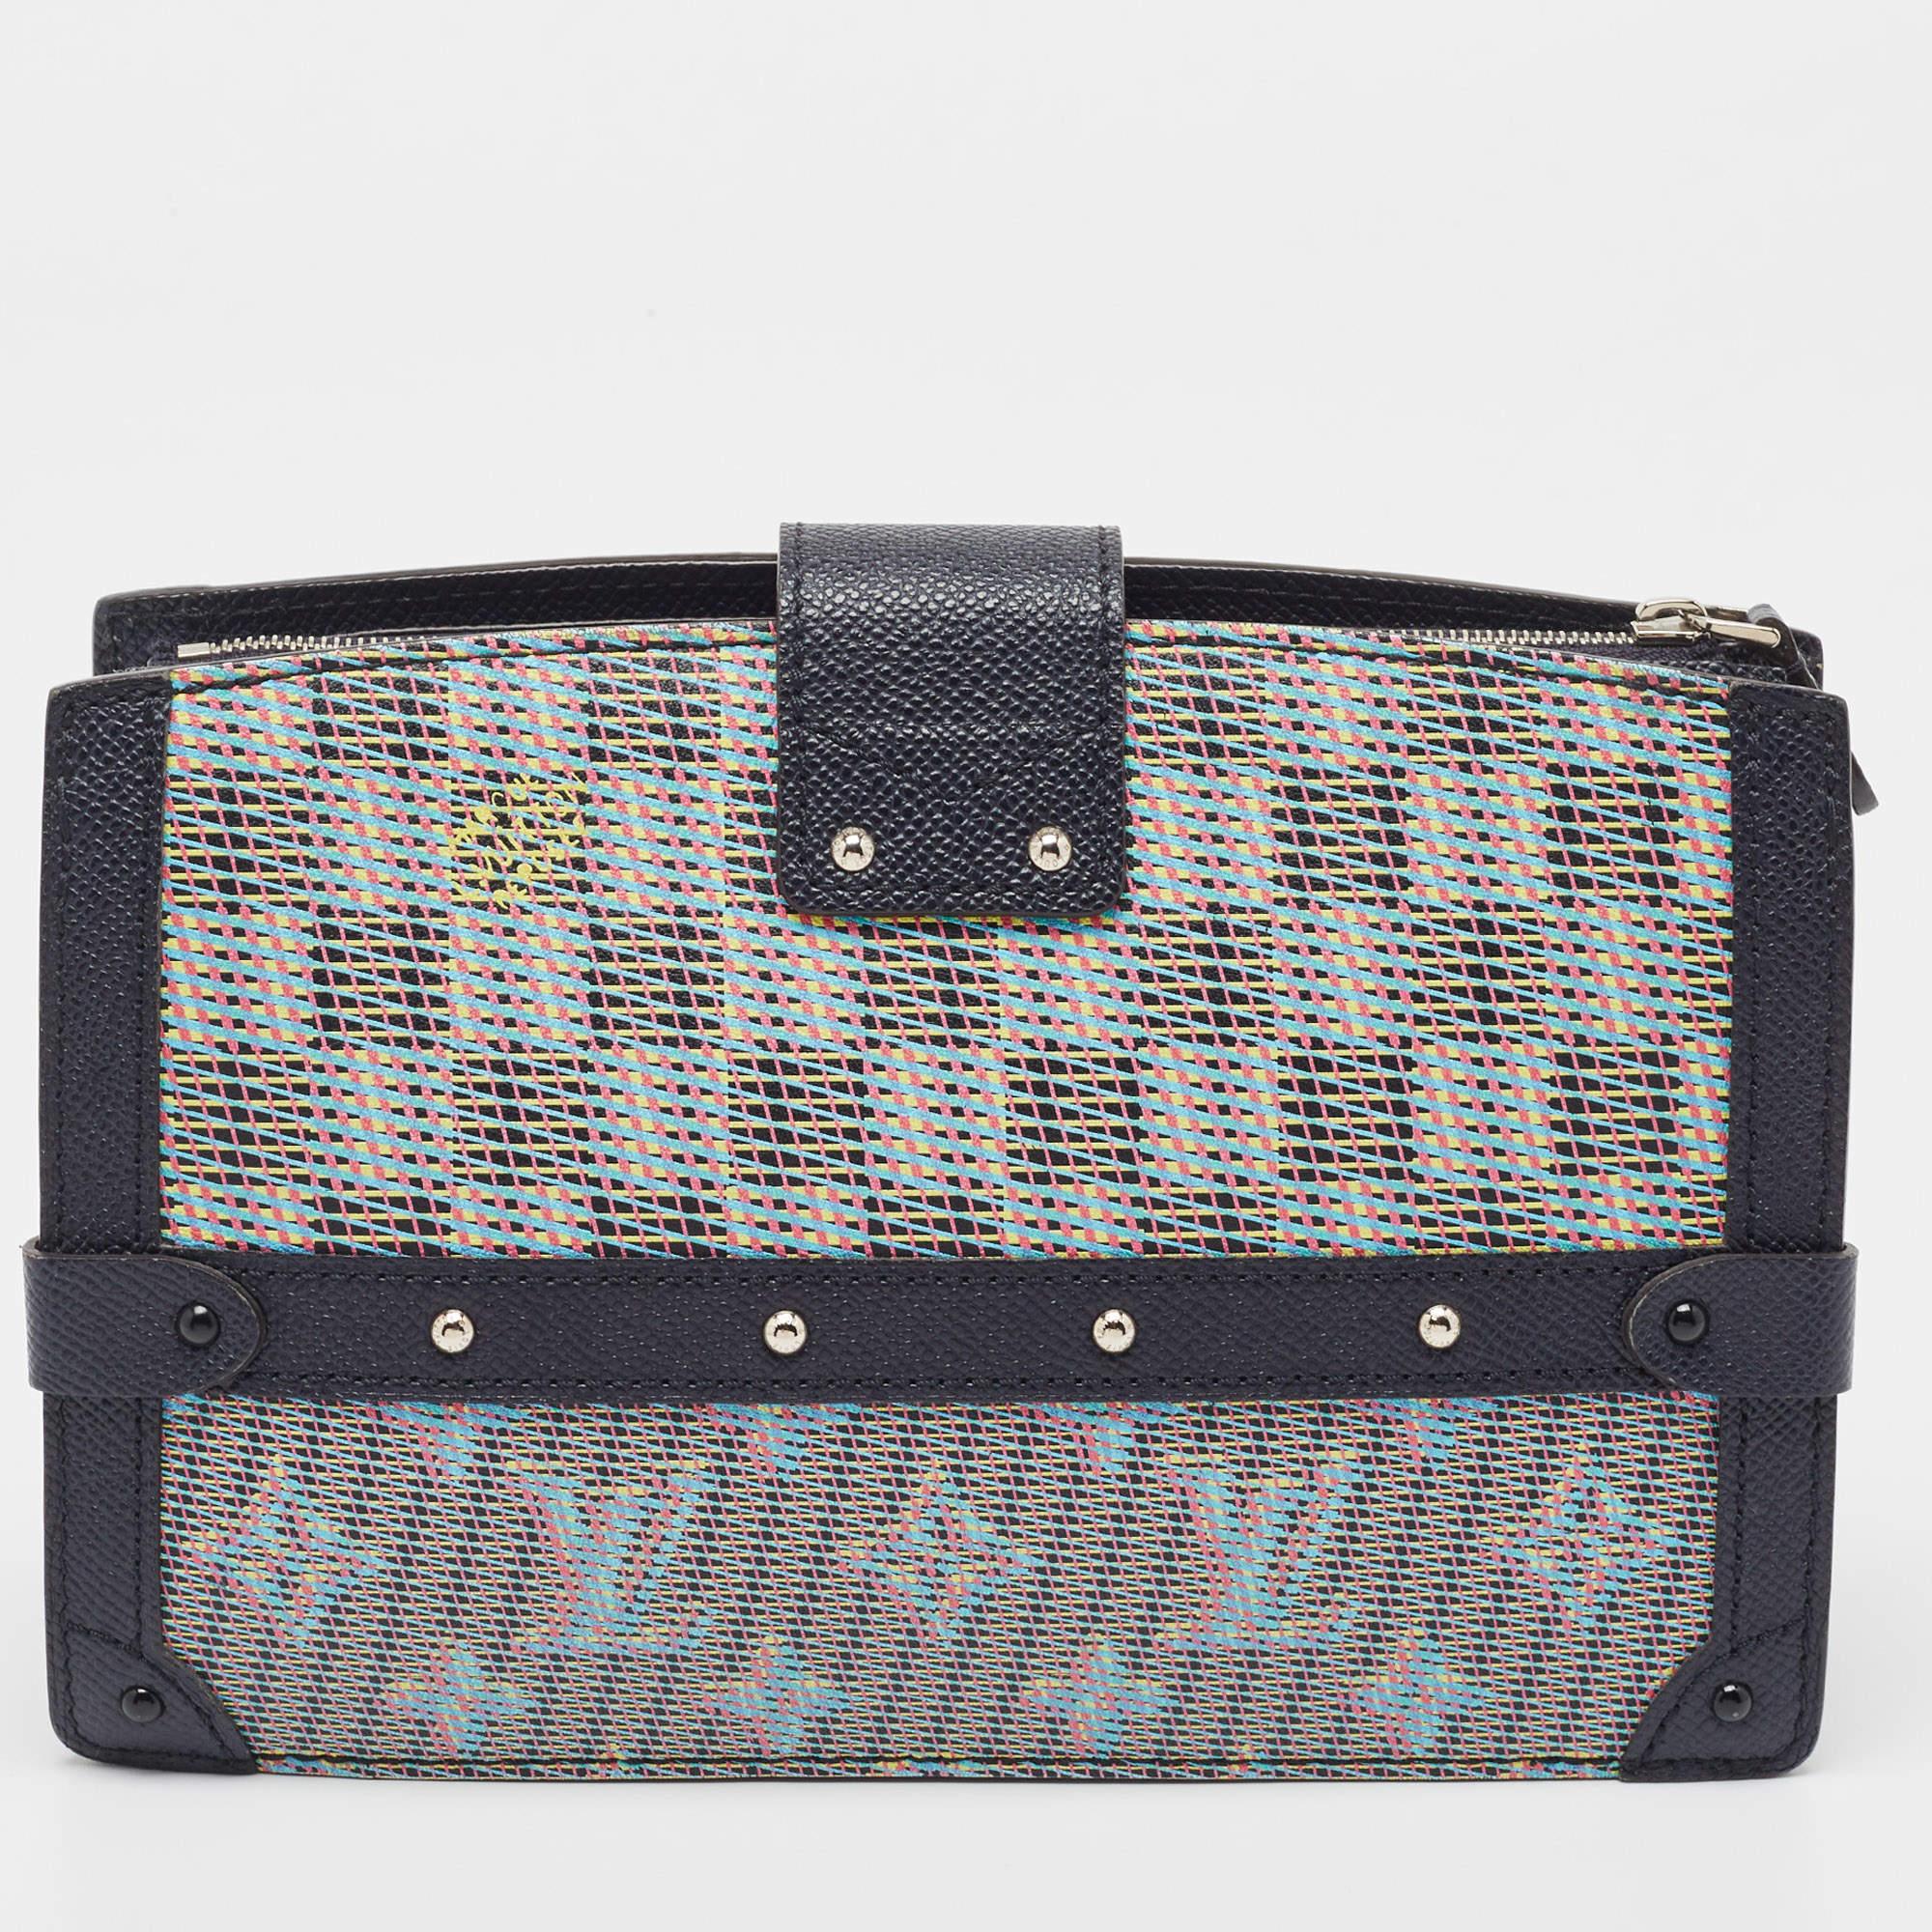 Delivered as part of Louis Vuitton's Fall 2018 collection by Nicholas Ghesquiere, the Trunk Clutch is like a stunning reiteration of the Petite Malle and inspired by the iconic Louis Vuitton trunks. Crafted from Monogram canvas, the clutch bag is